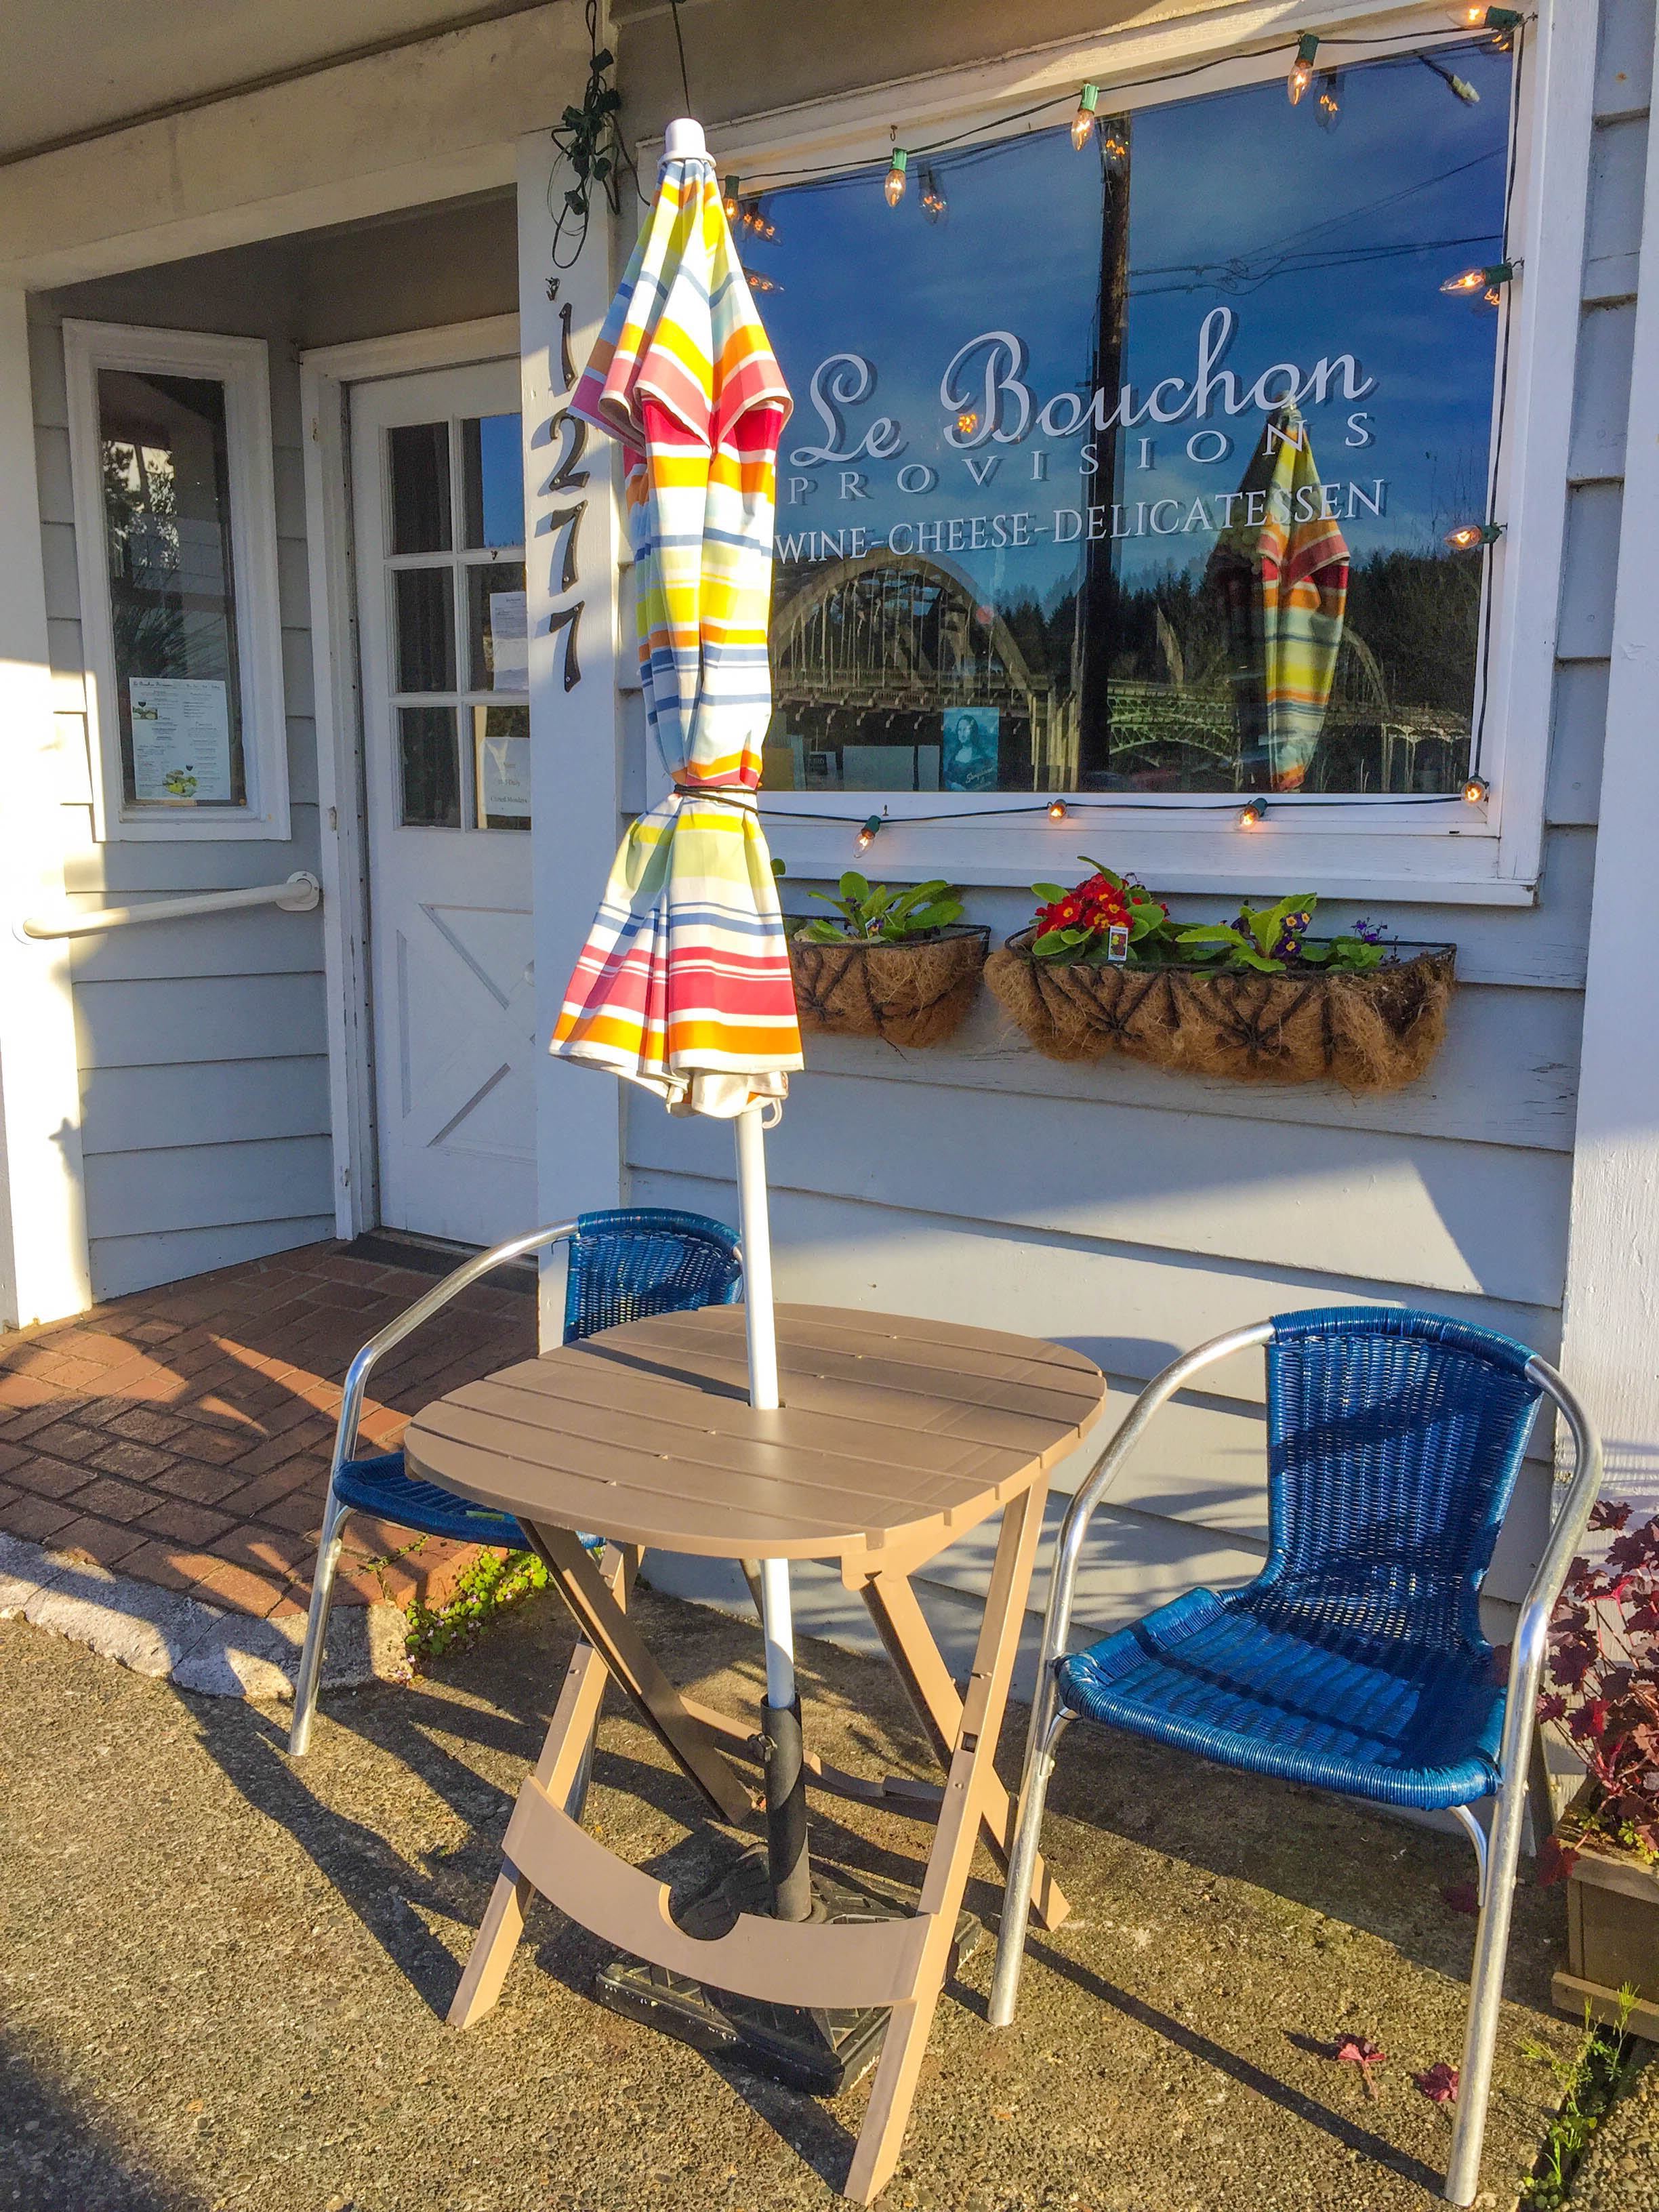 Guide to Florence Oregon: Le Bouchon